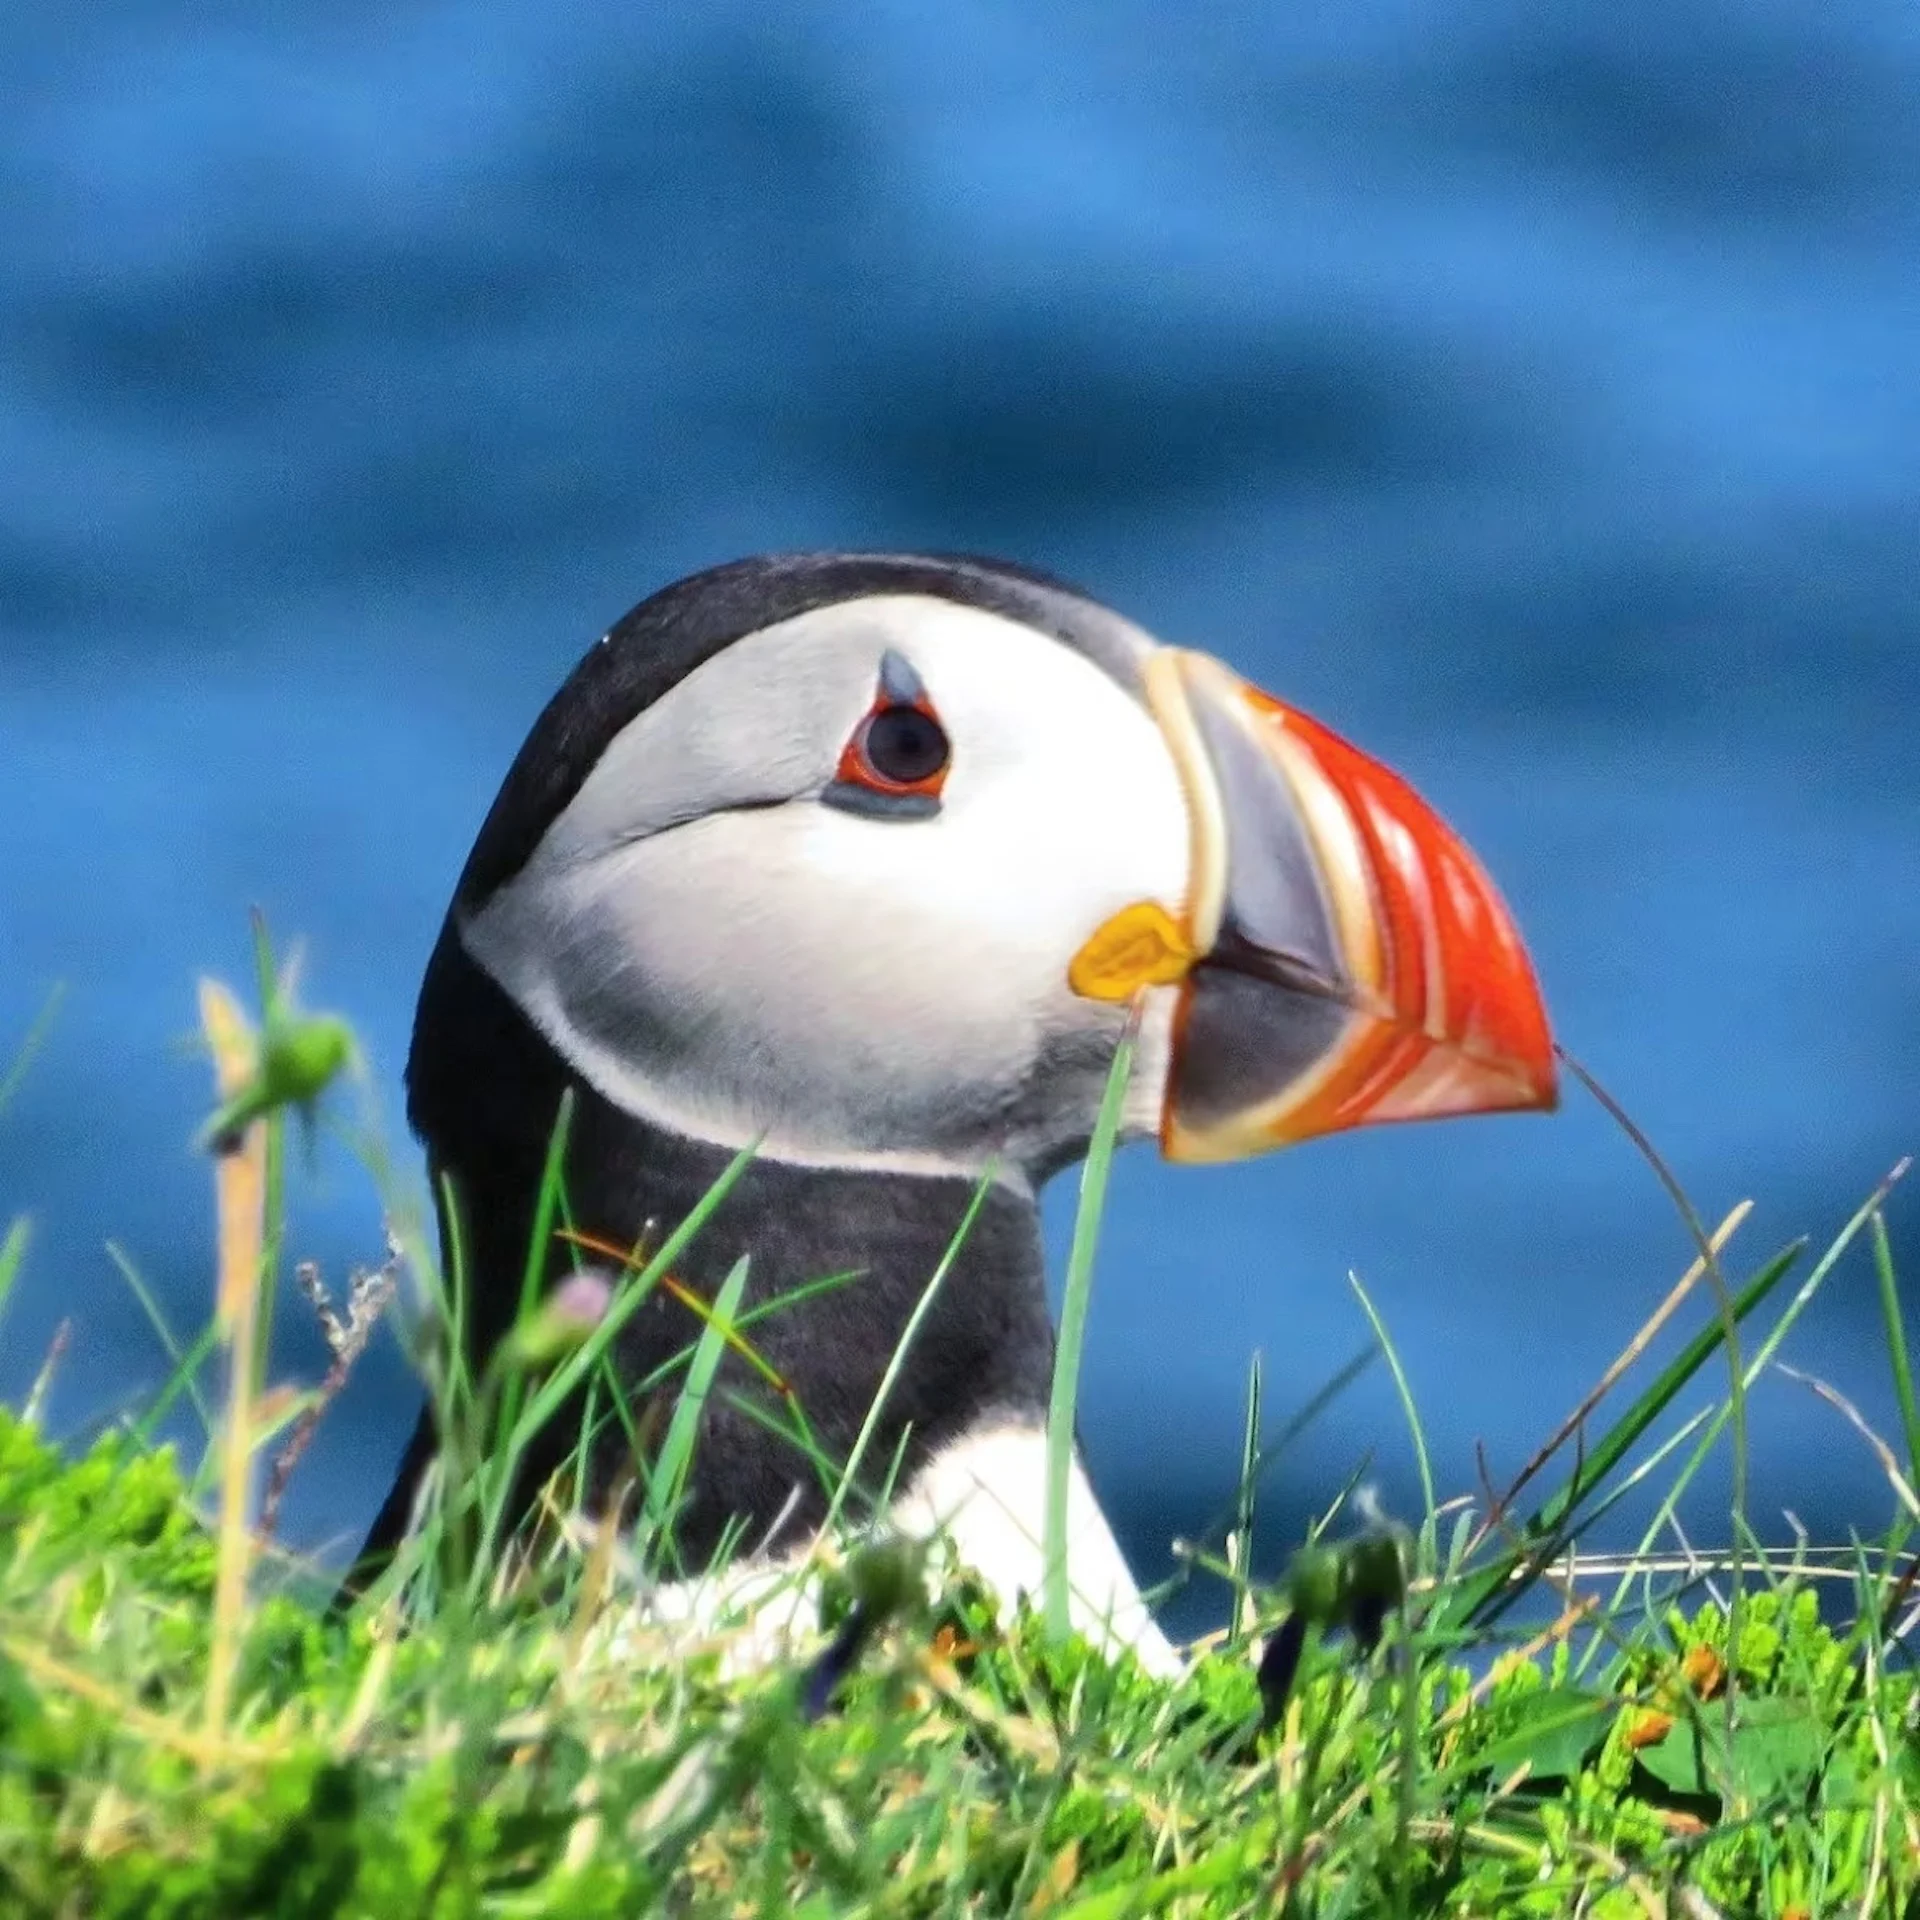 At Canada's largest Atlantic puffin colony, chicks are dying of starvation